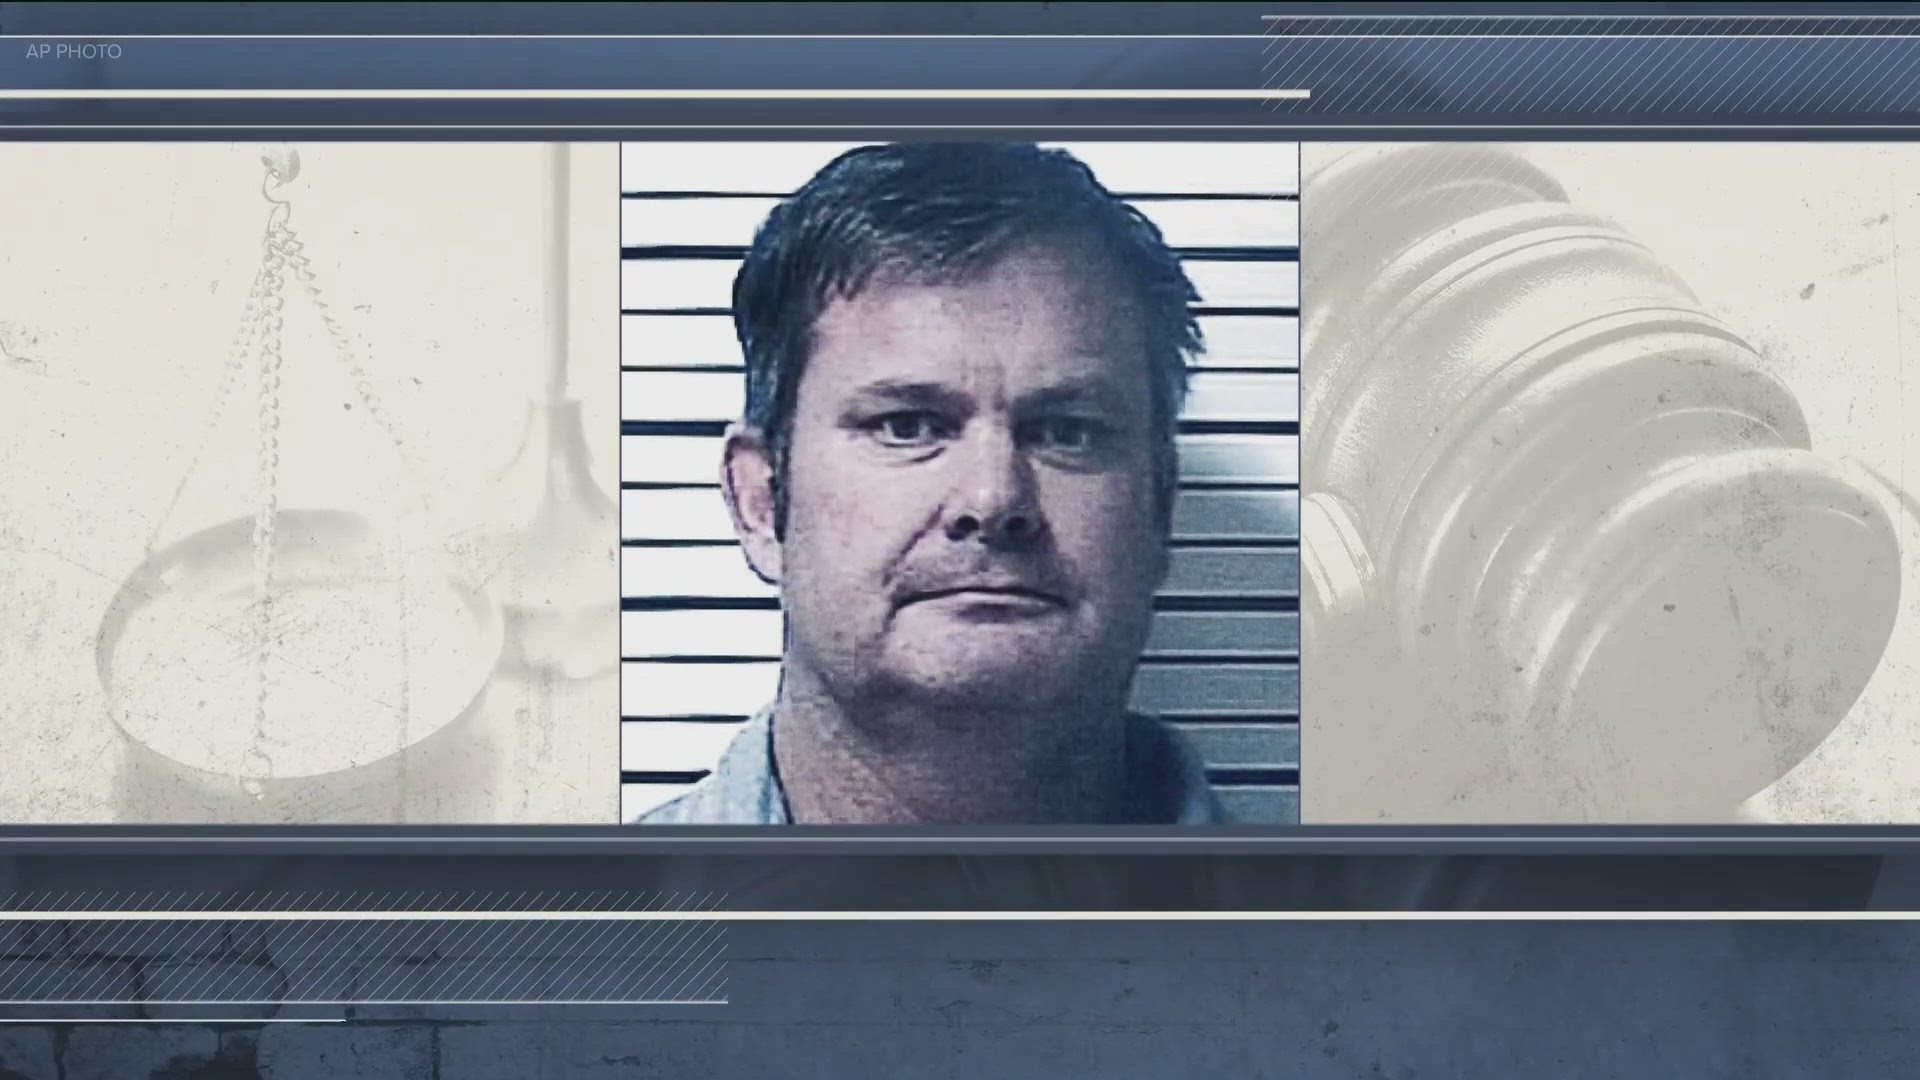 Daybell is accused of killing his current wife's two children, and his late wife. KTVB breaks down the timeline of events, from the 90s to the upcoming trial.